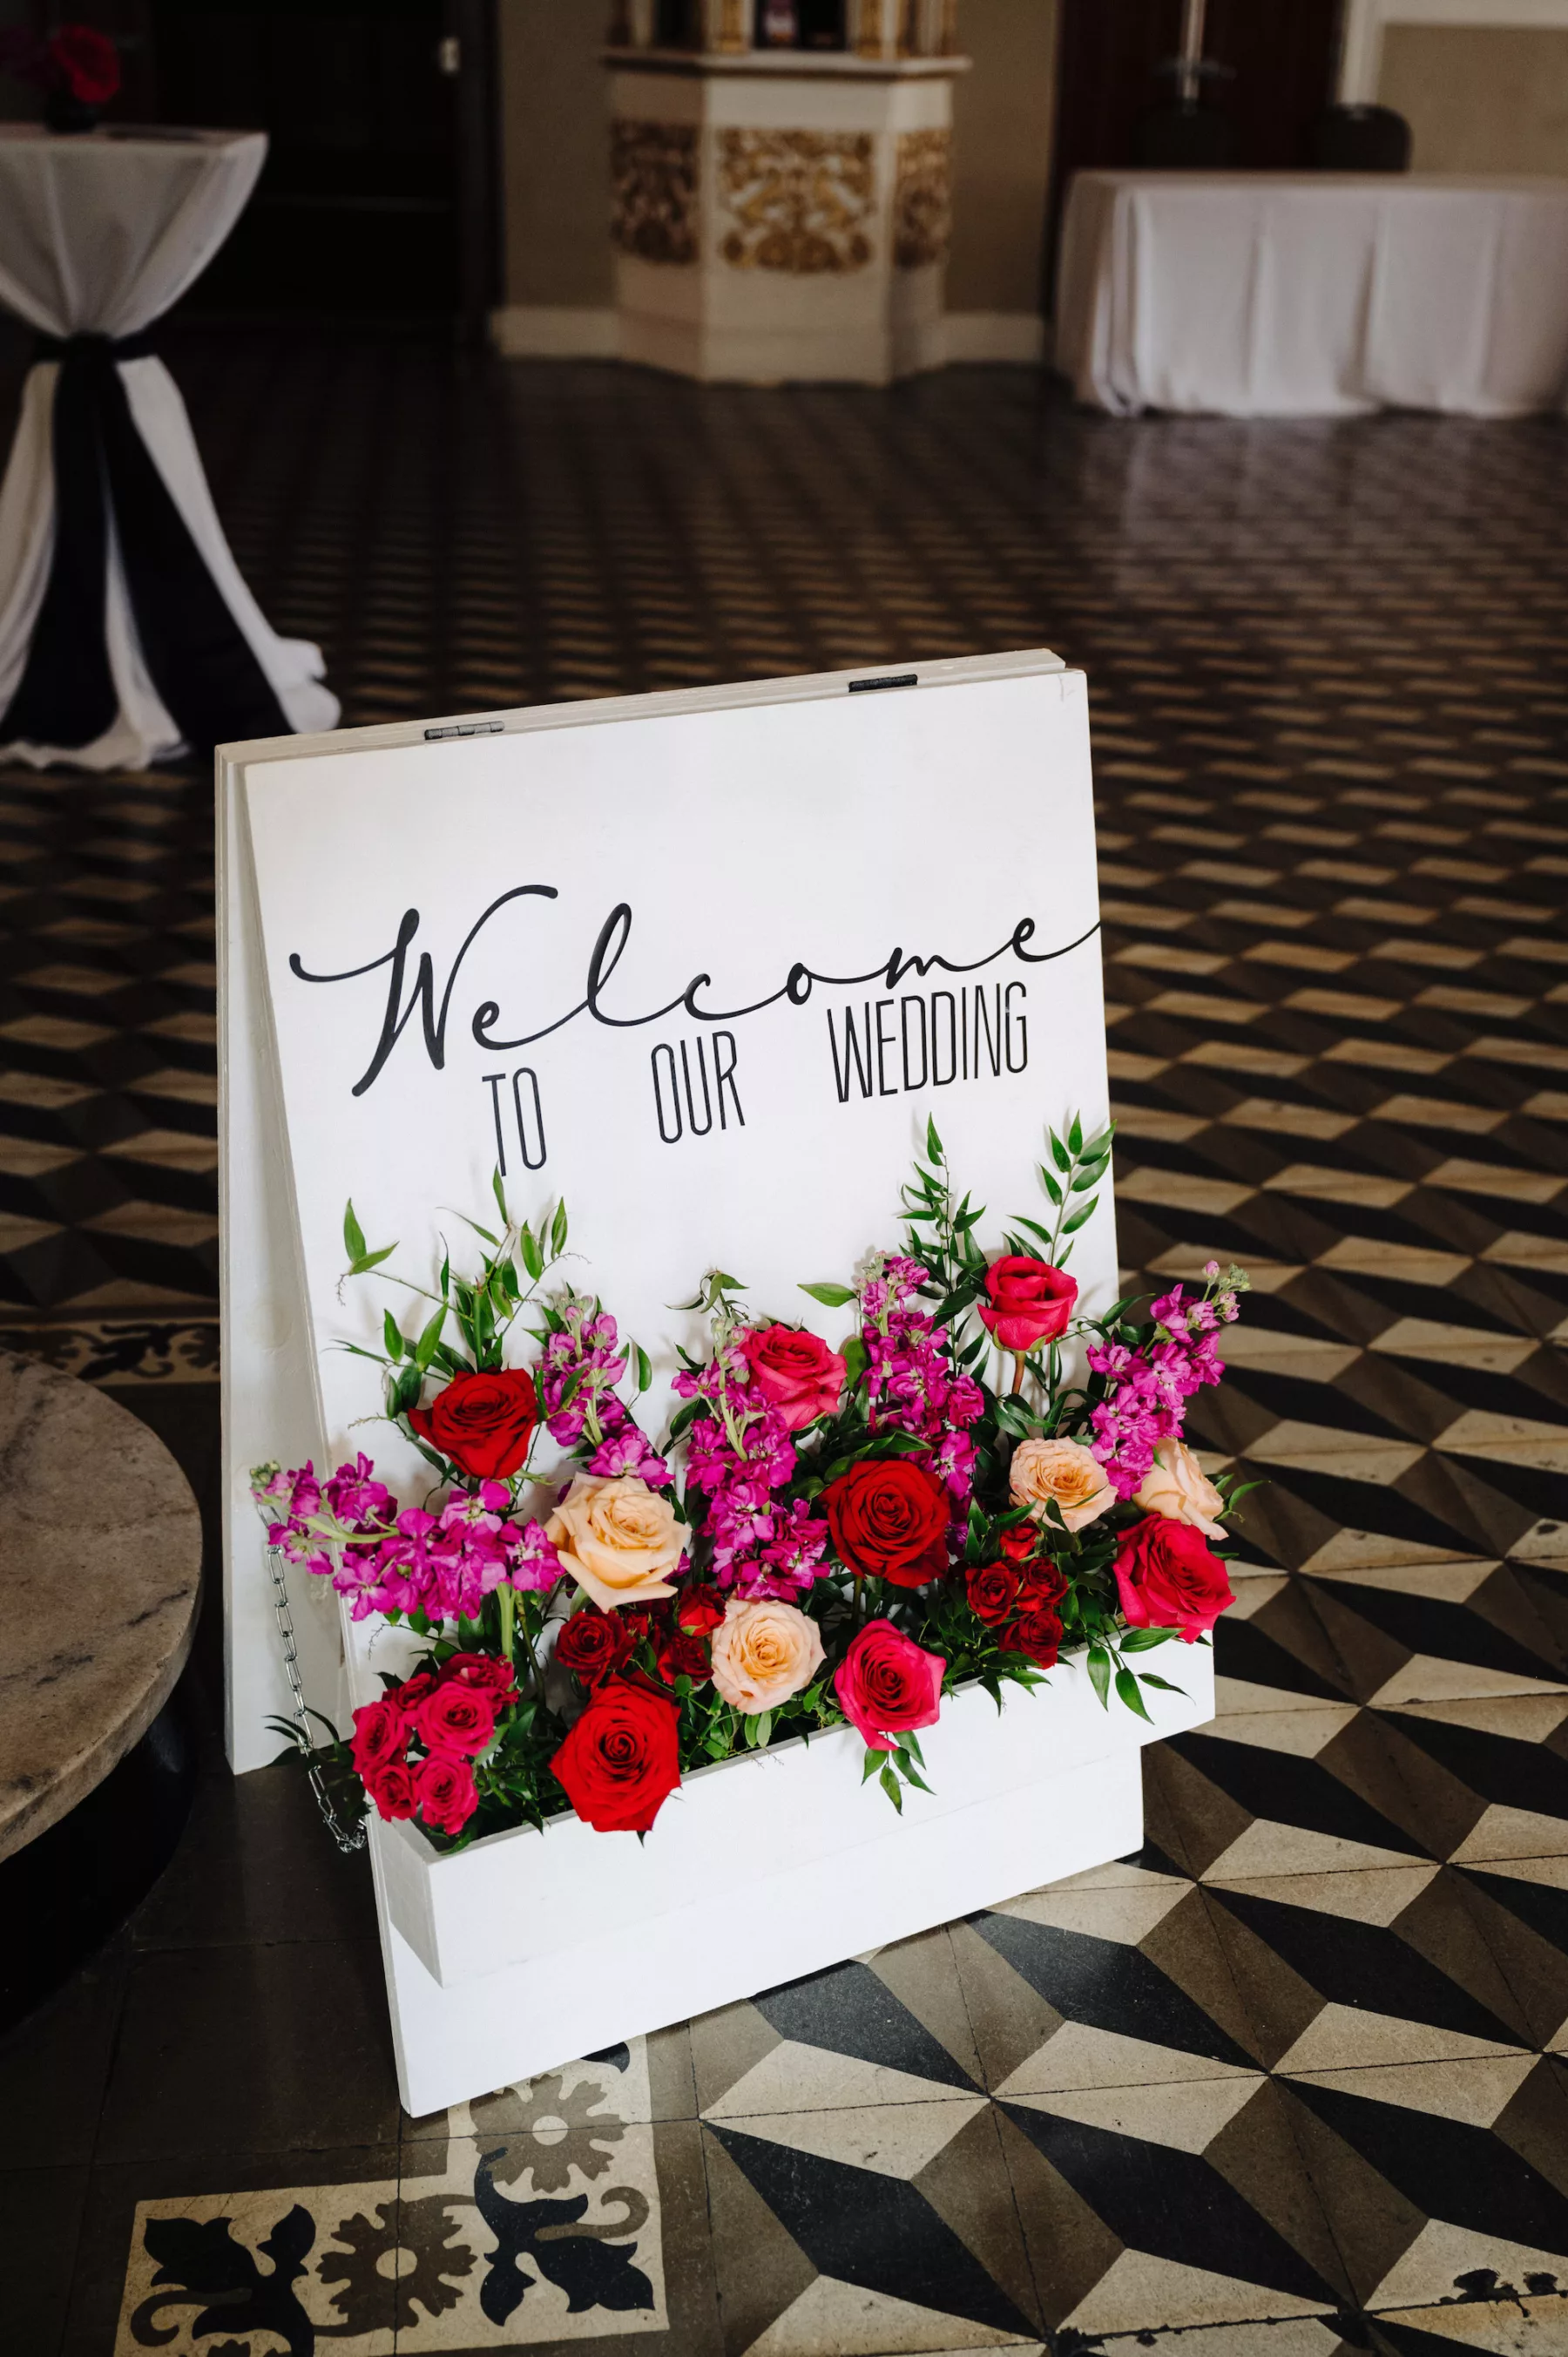 Welcome To Our Wedding Italian Inspired Sign with Flower Box Ideas | Red and Orange Roses, Pink Stock Flowers, and Greenery Floral Arrangement | Tampa Bay Florist Save The Date Florida